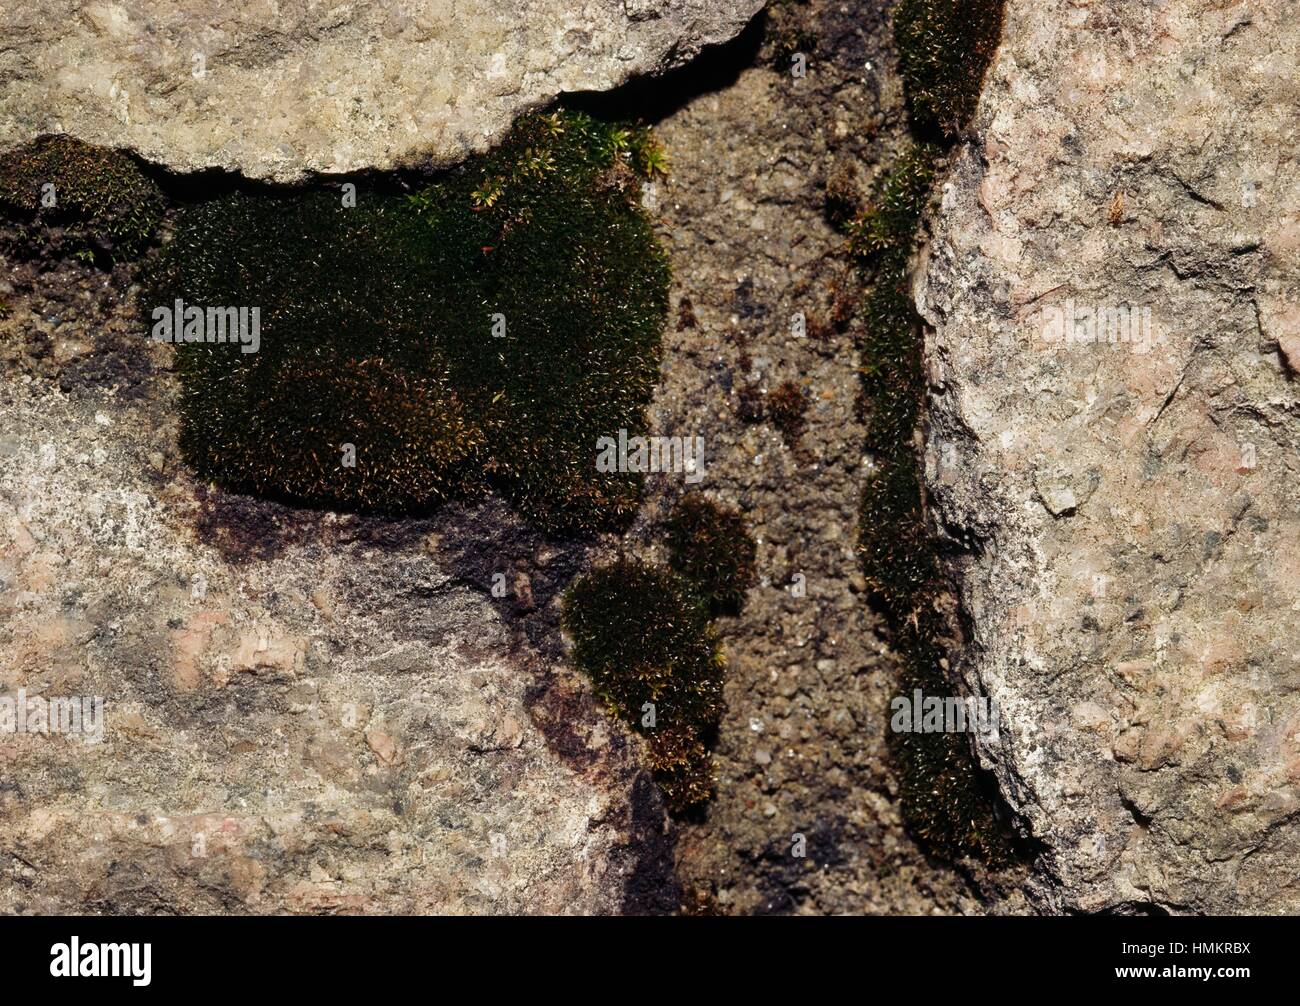 Grimmia moss encrusted rock. Stock Photo